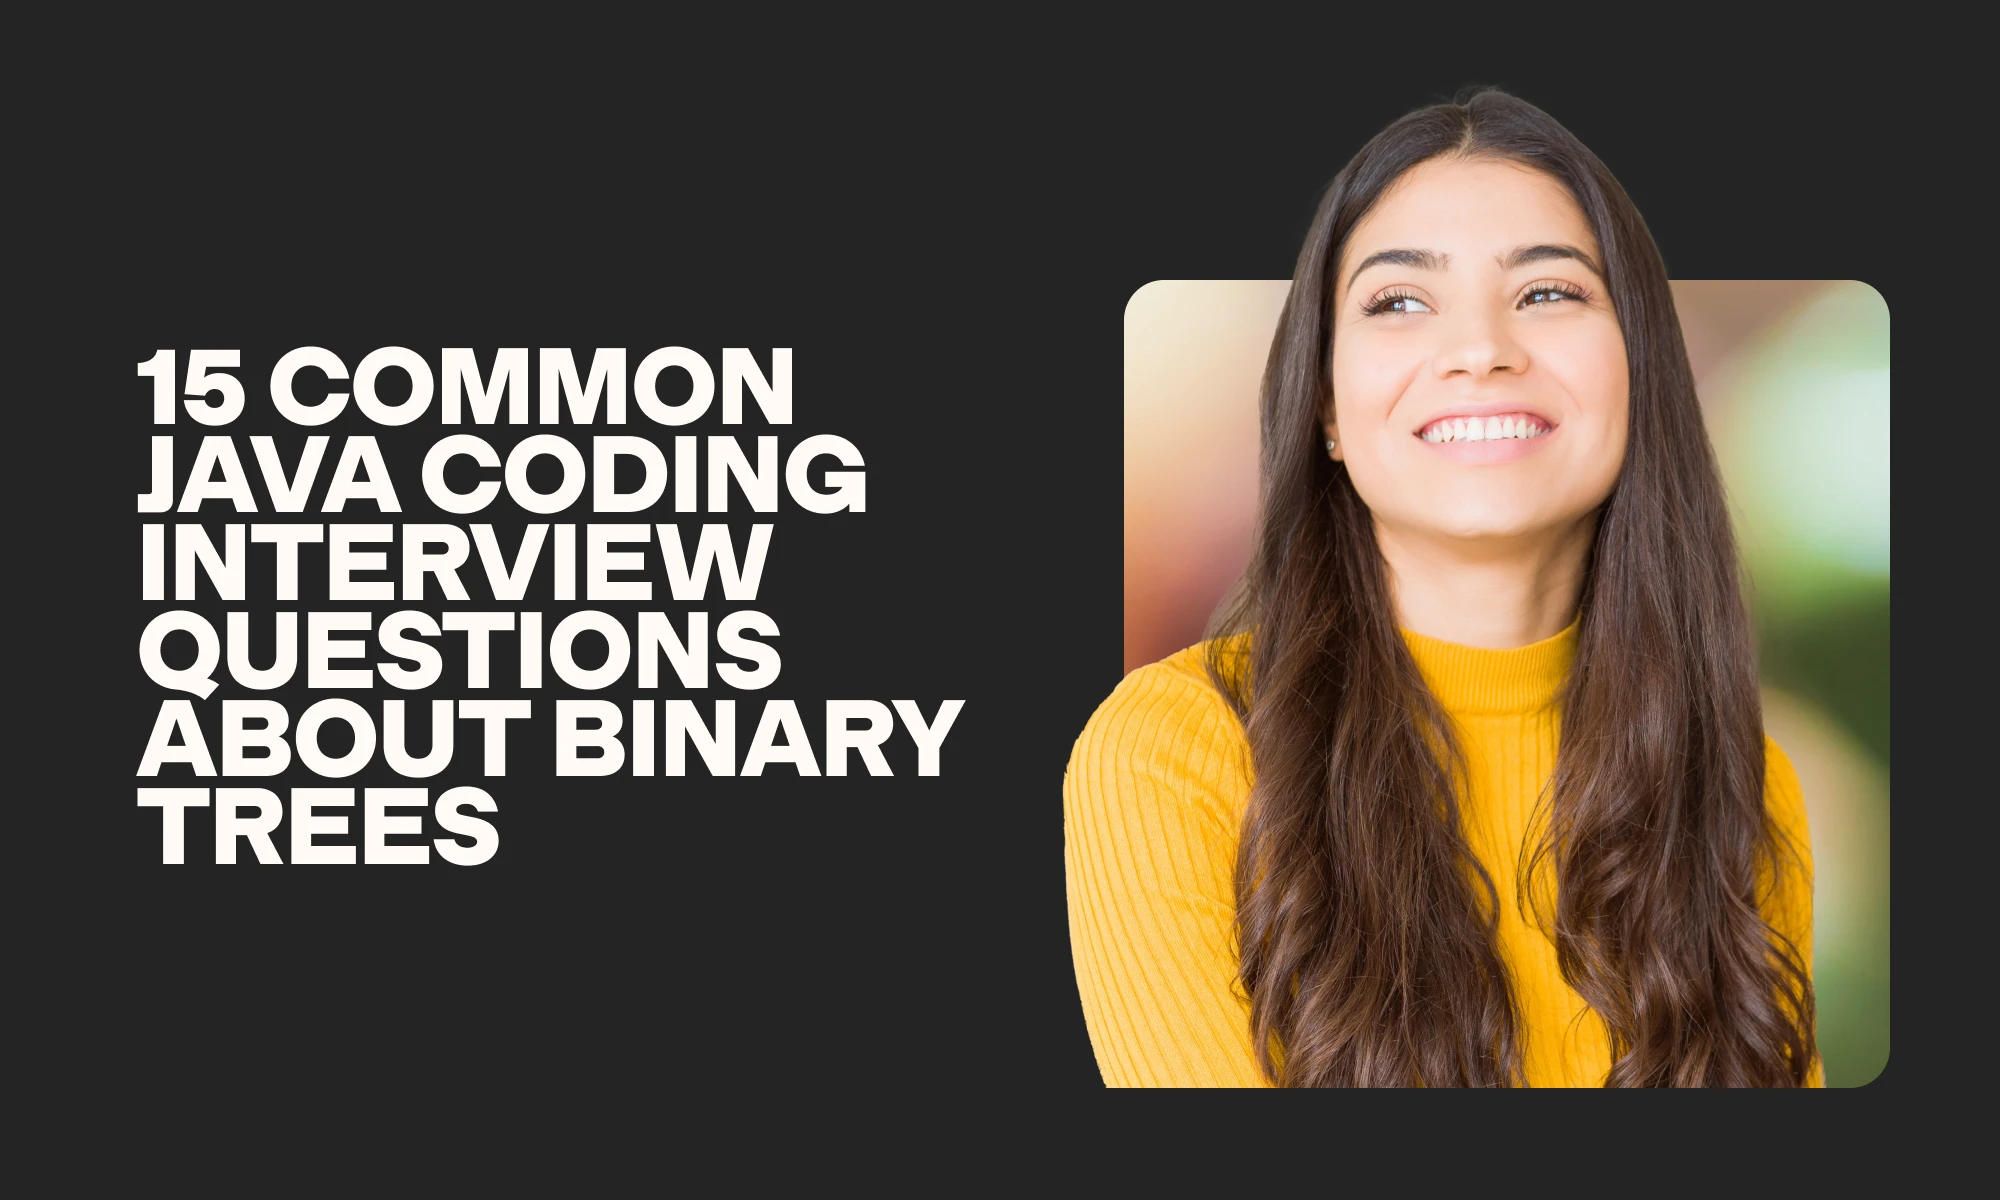 15 common Java coding interview questions about binary trees